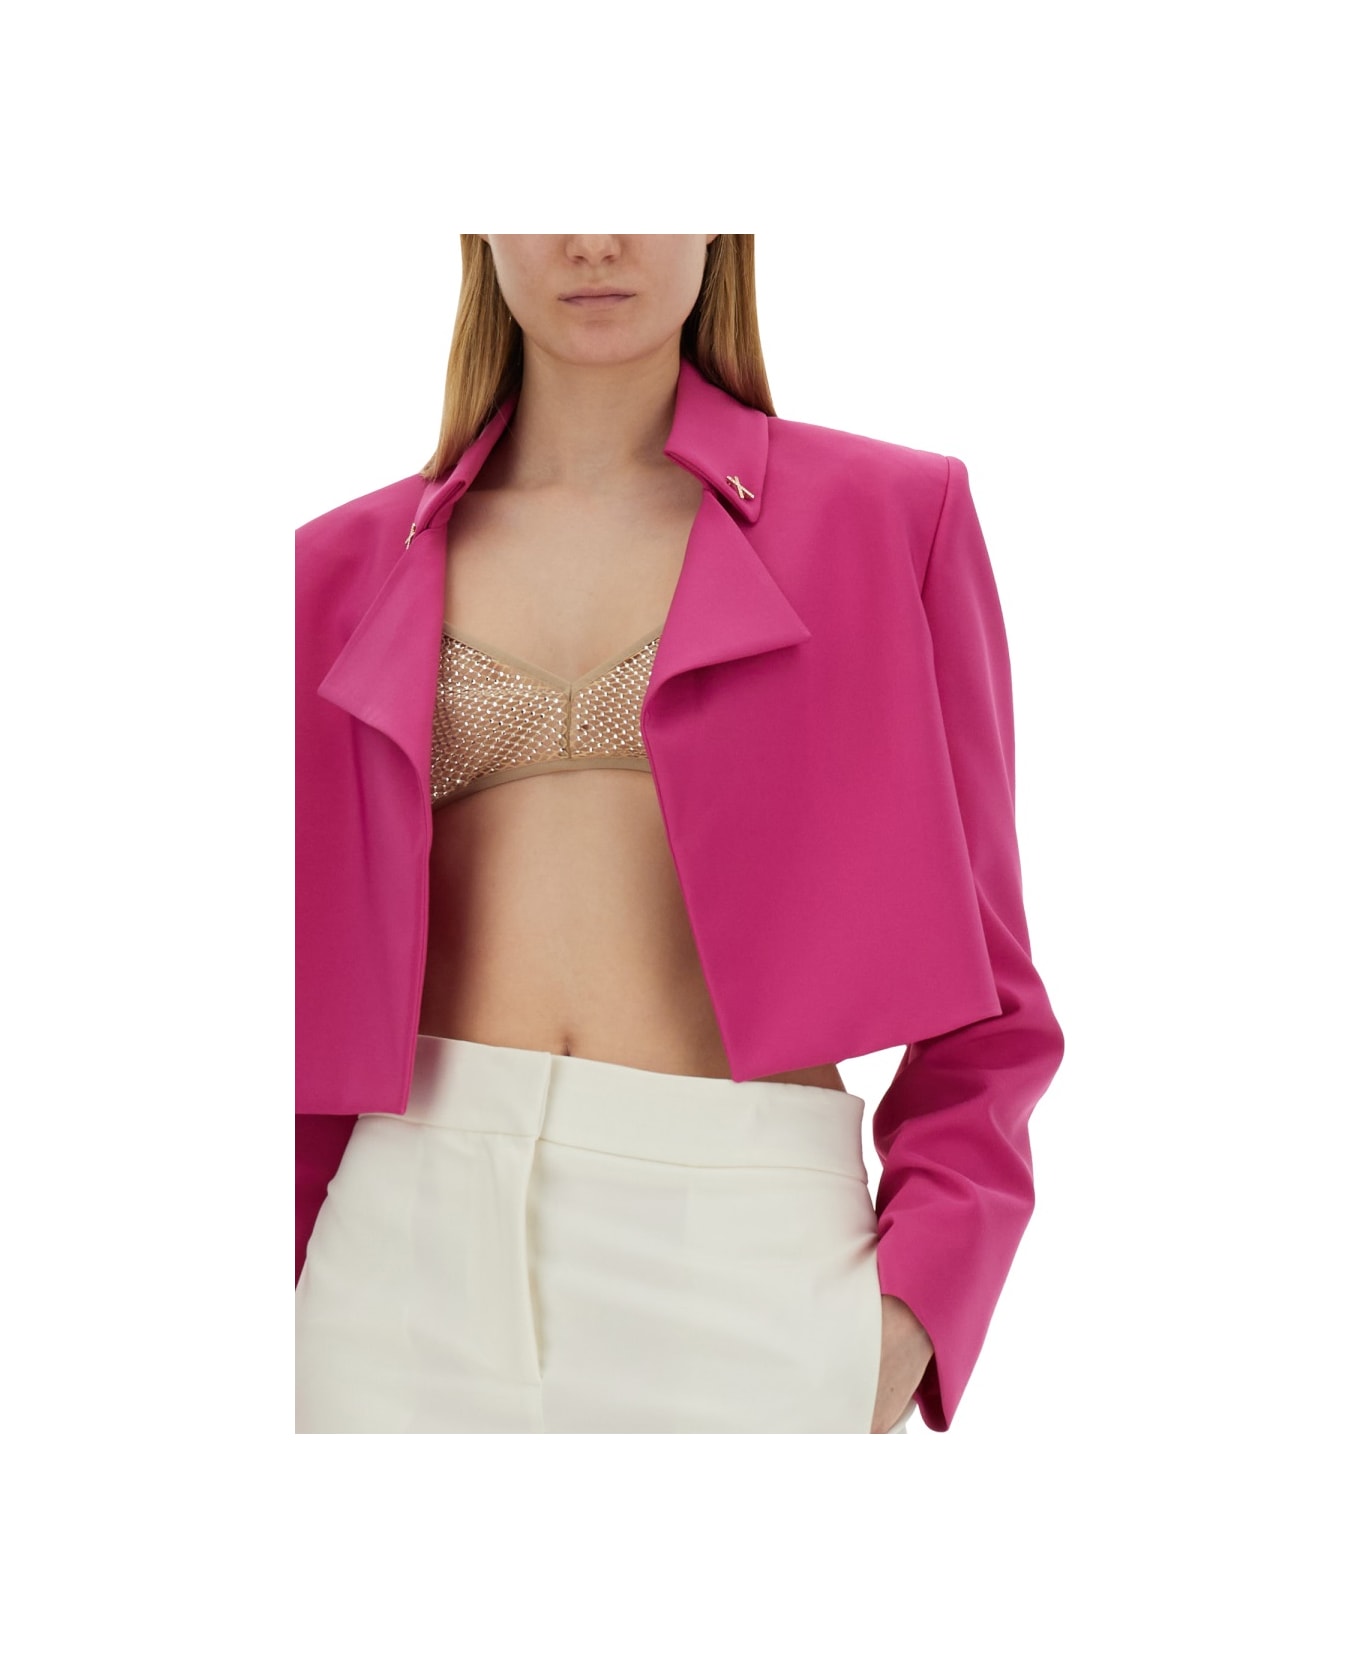 Genny Cropped Jacket - FUXIA ジャケット